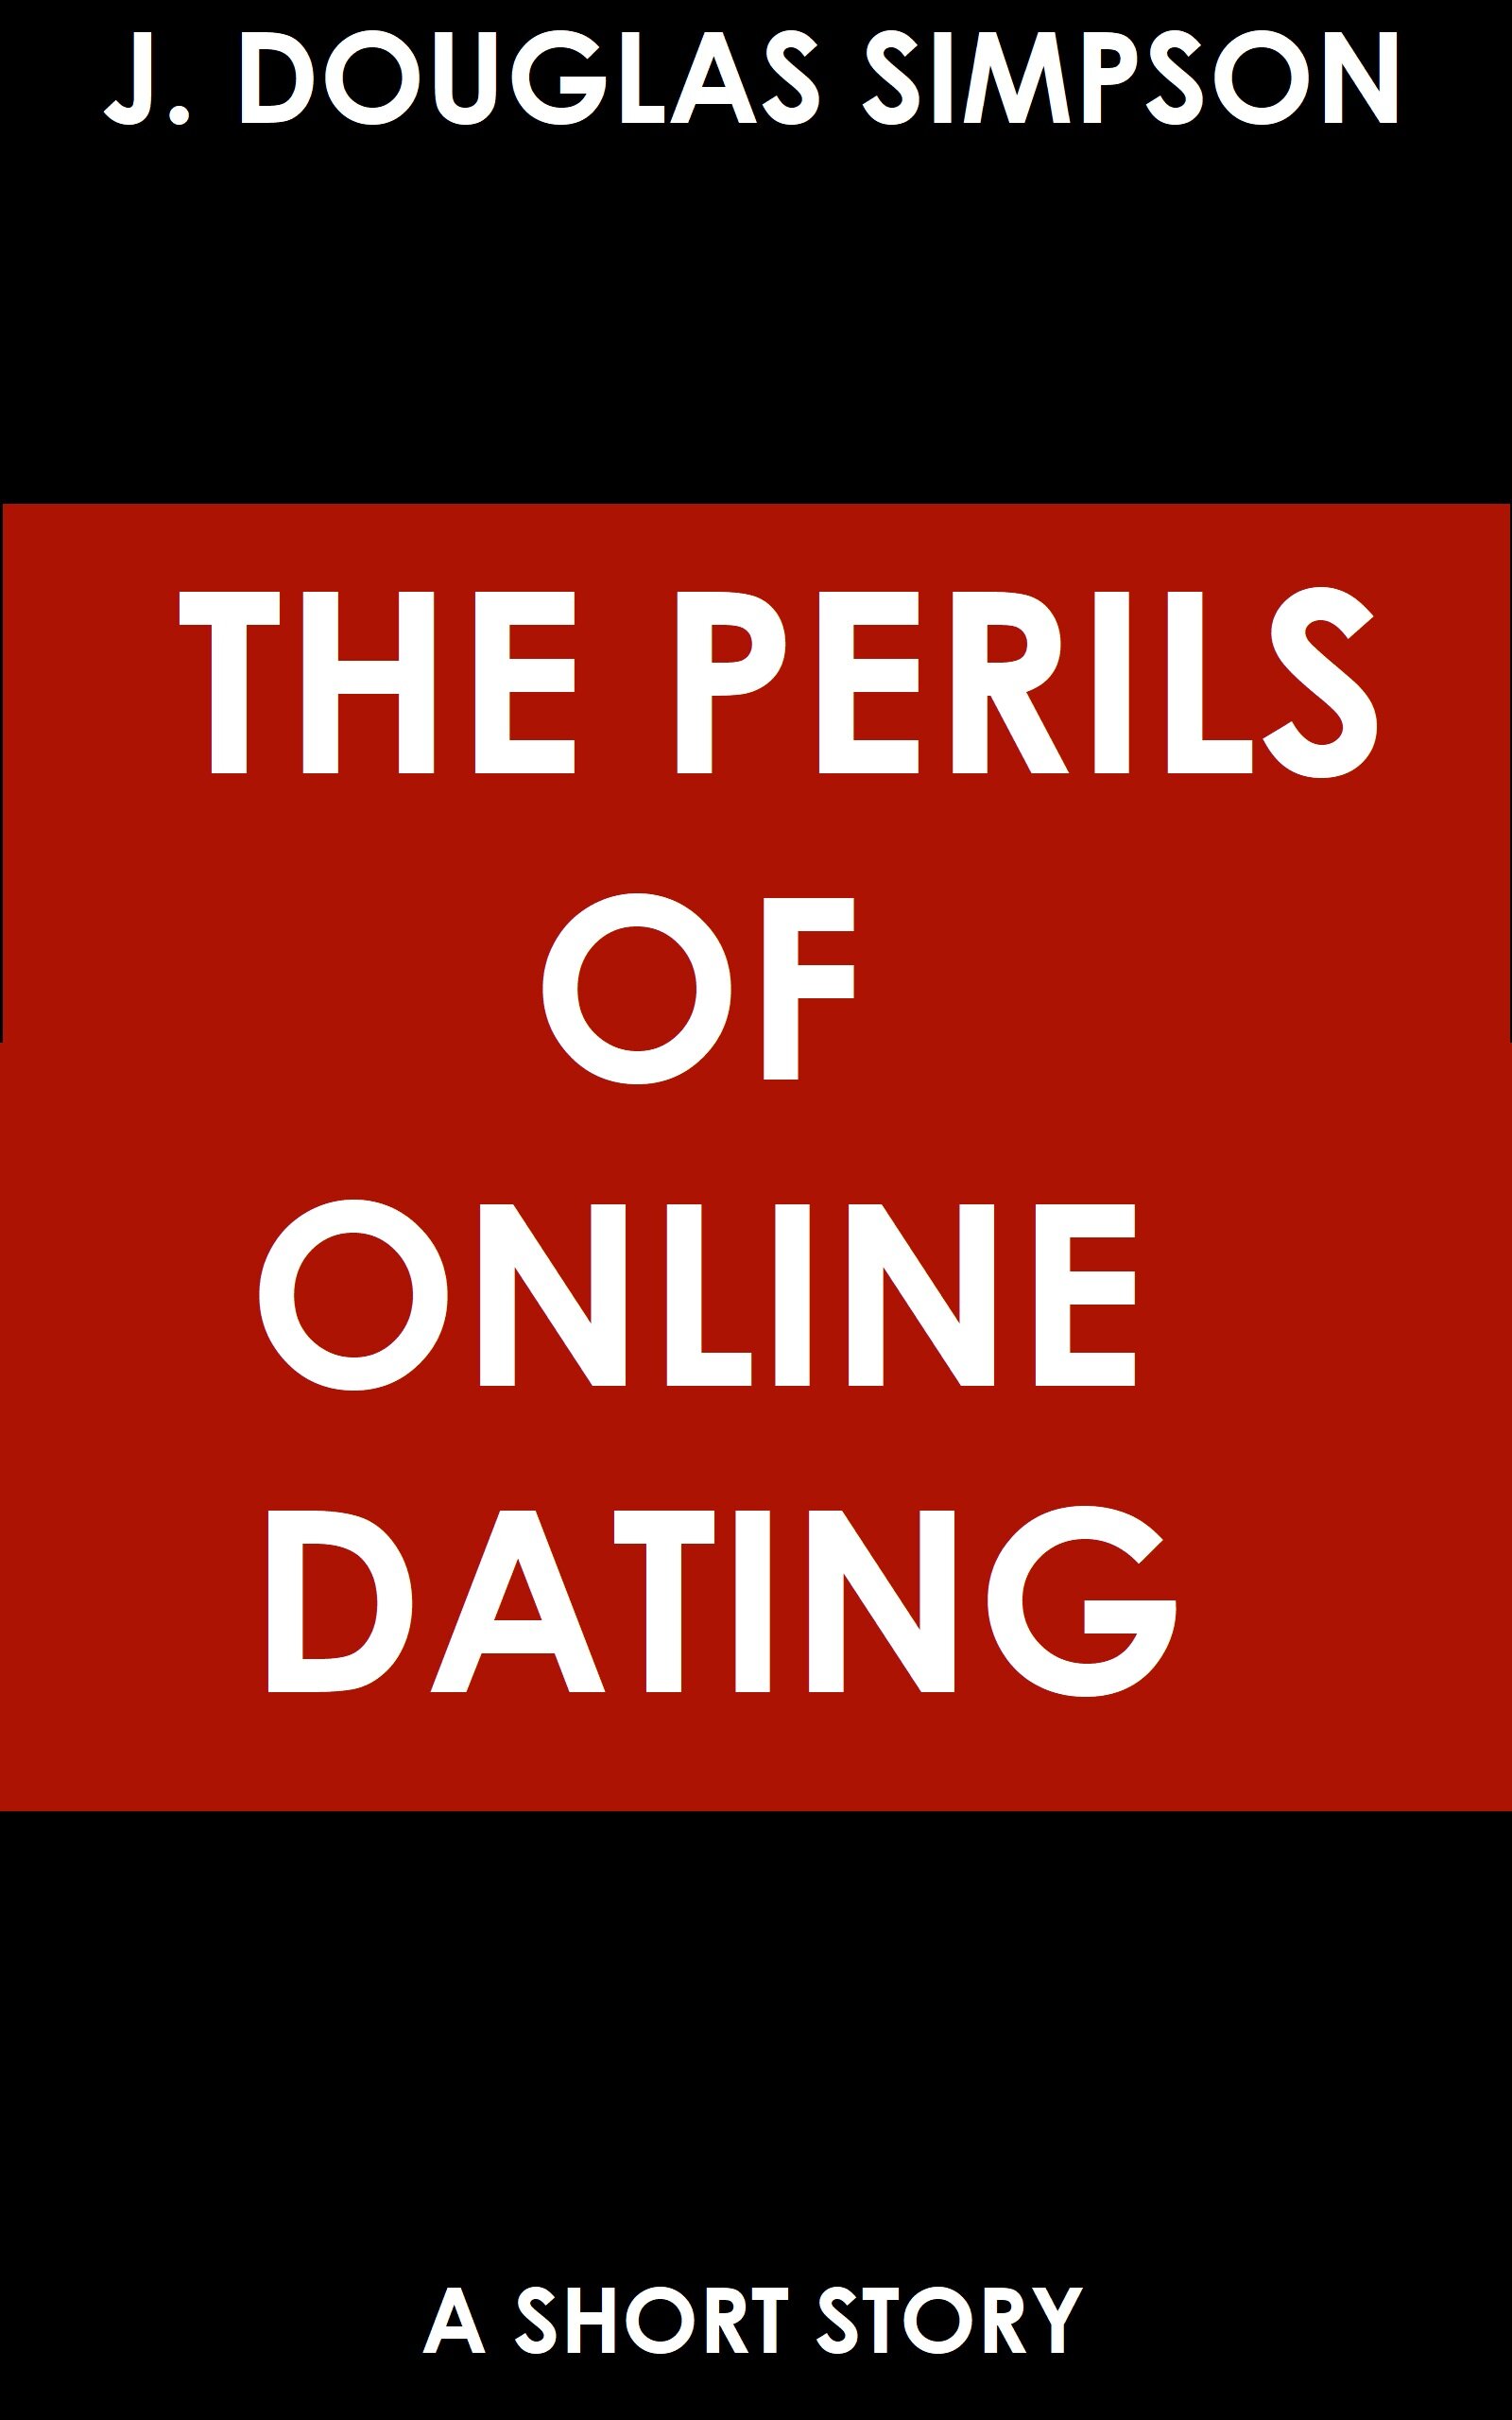 THE PERILS OF ONLINE DATING